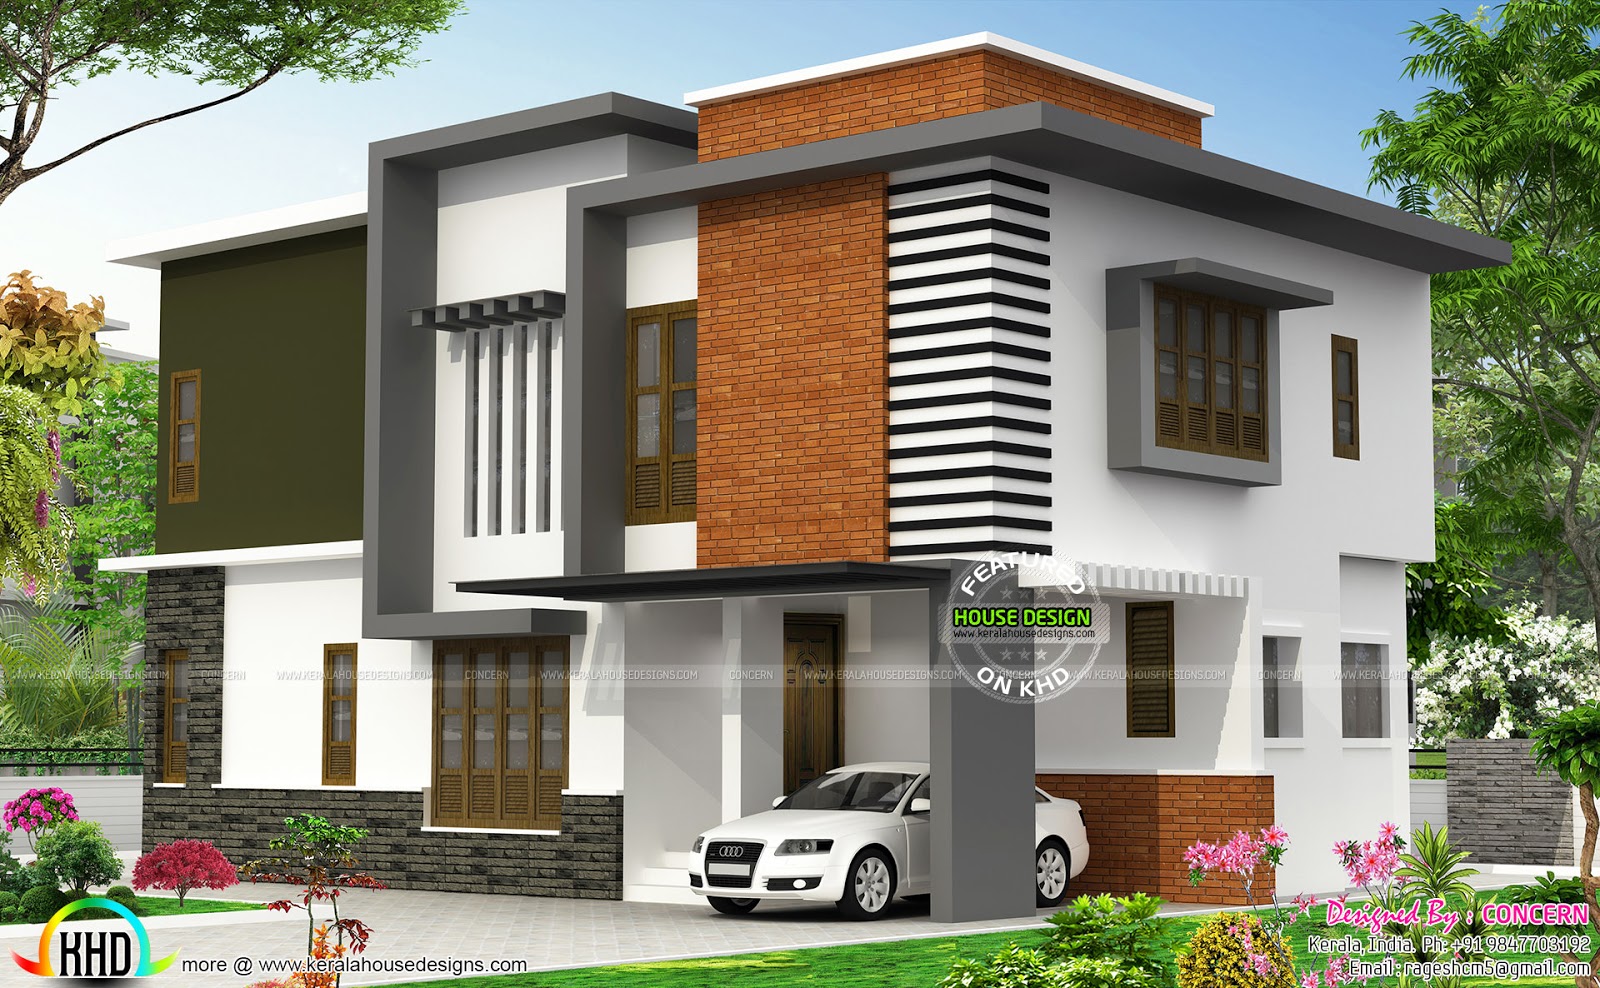  Contemporary  house  with brick  show wall Kerala home  